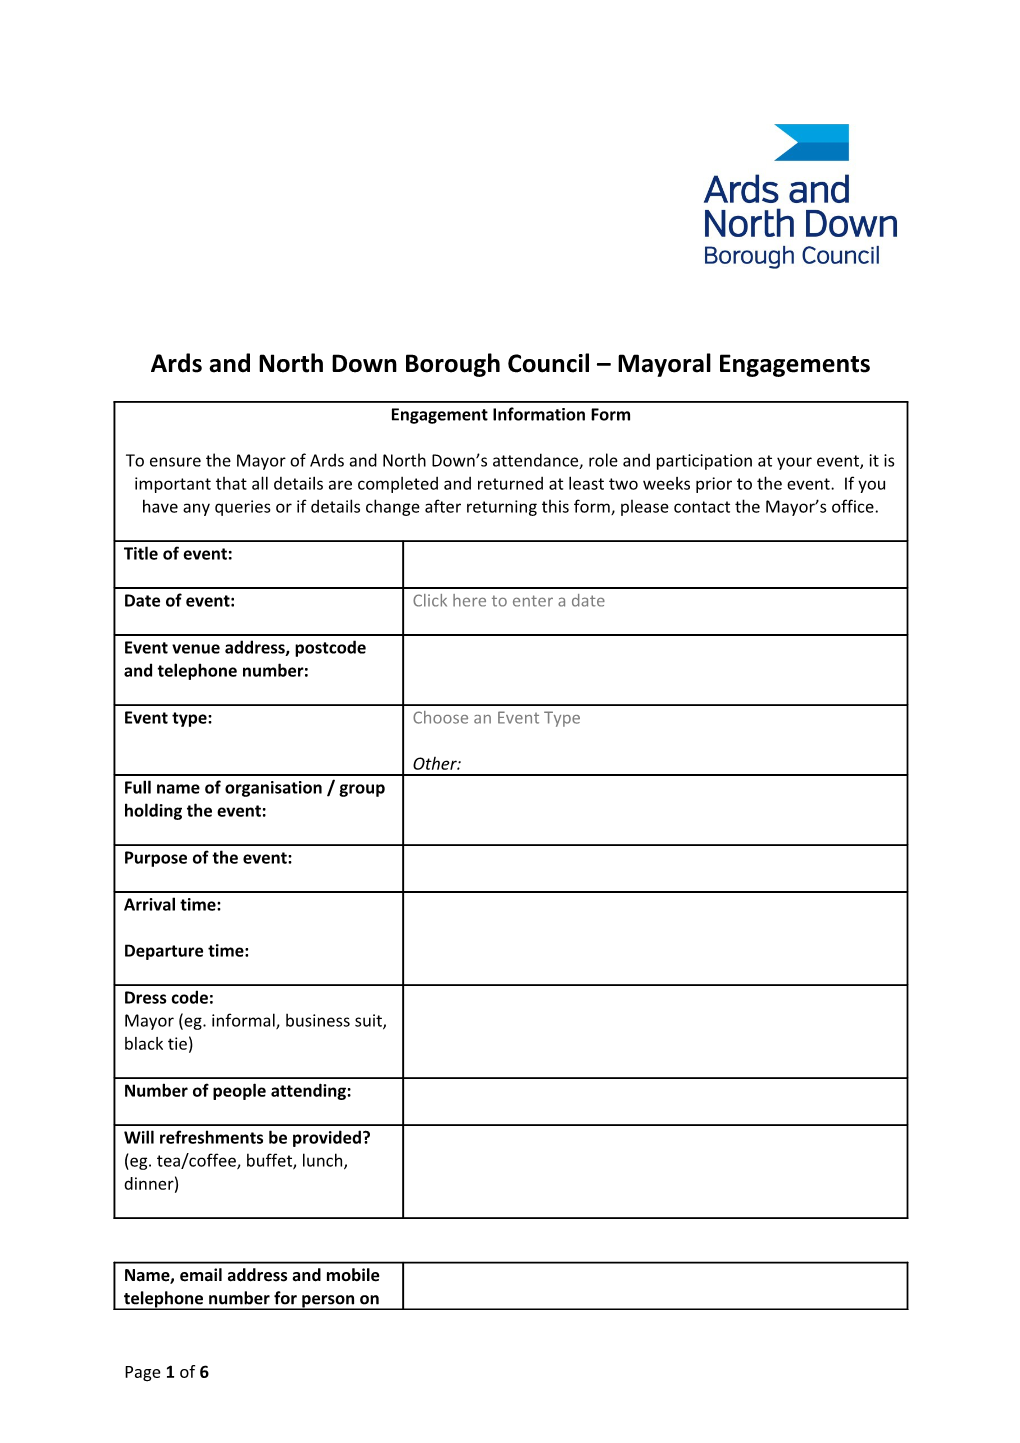 Ards and North Down Borough Council Mayoral Engagements